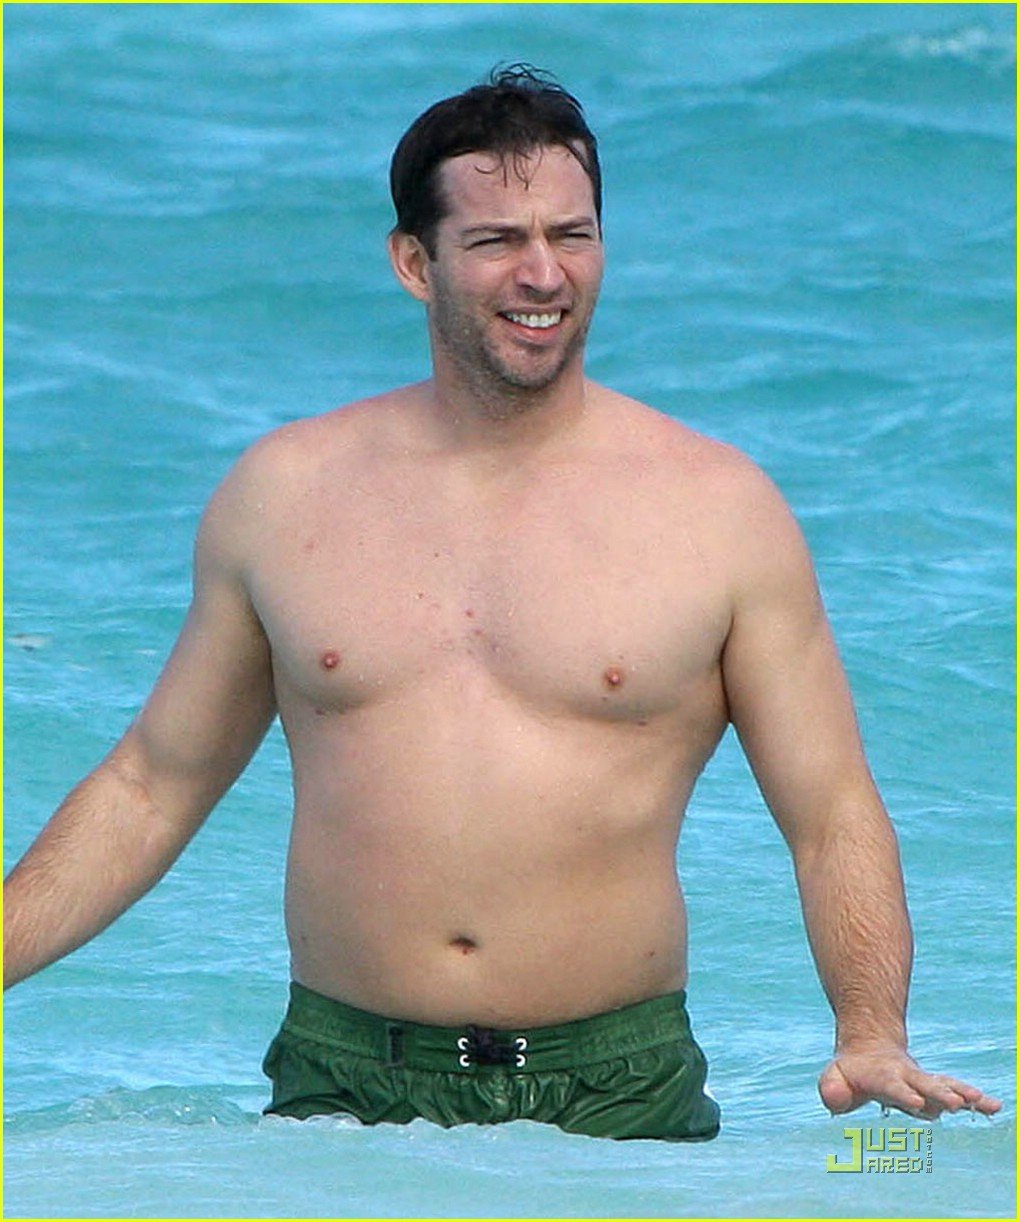 Harry Connick Jr. is Shirtless harry connick jr shirtless 04 - Photo.